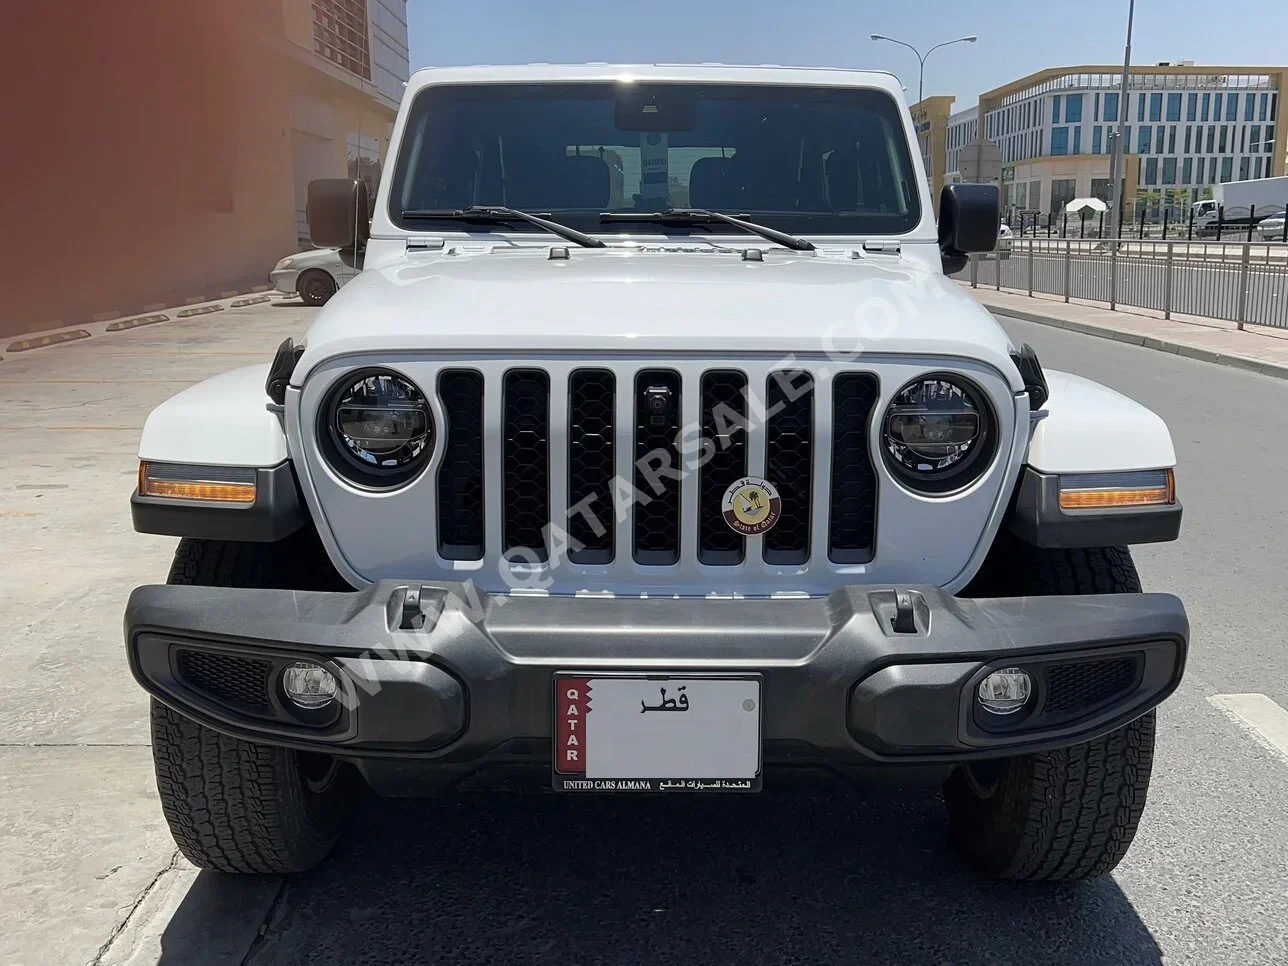 Jeep  Wrangler  80th Anniversary  2021  Automatic  22,350 Km  6 Cylinder  Four Wheel Drive (4WD)  SUV  White  With Warranty